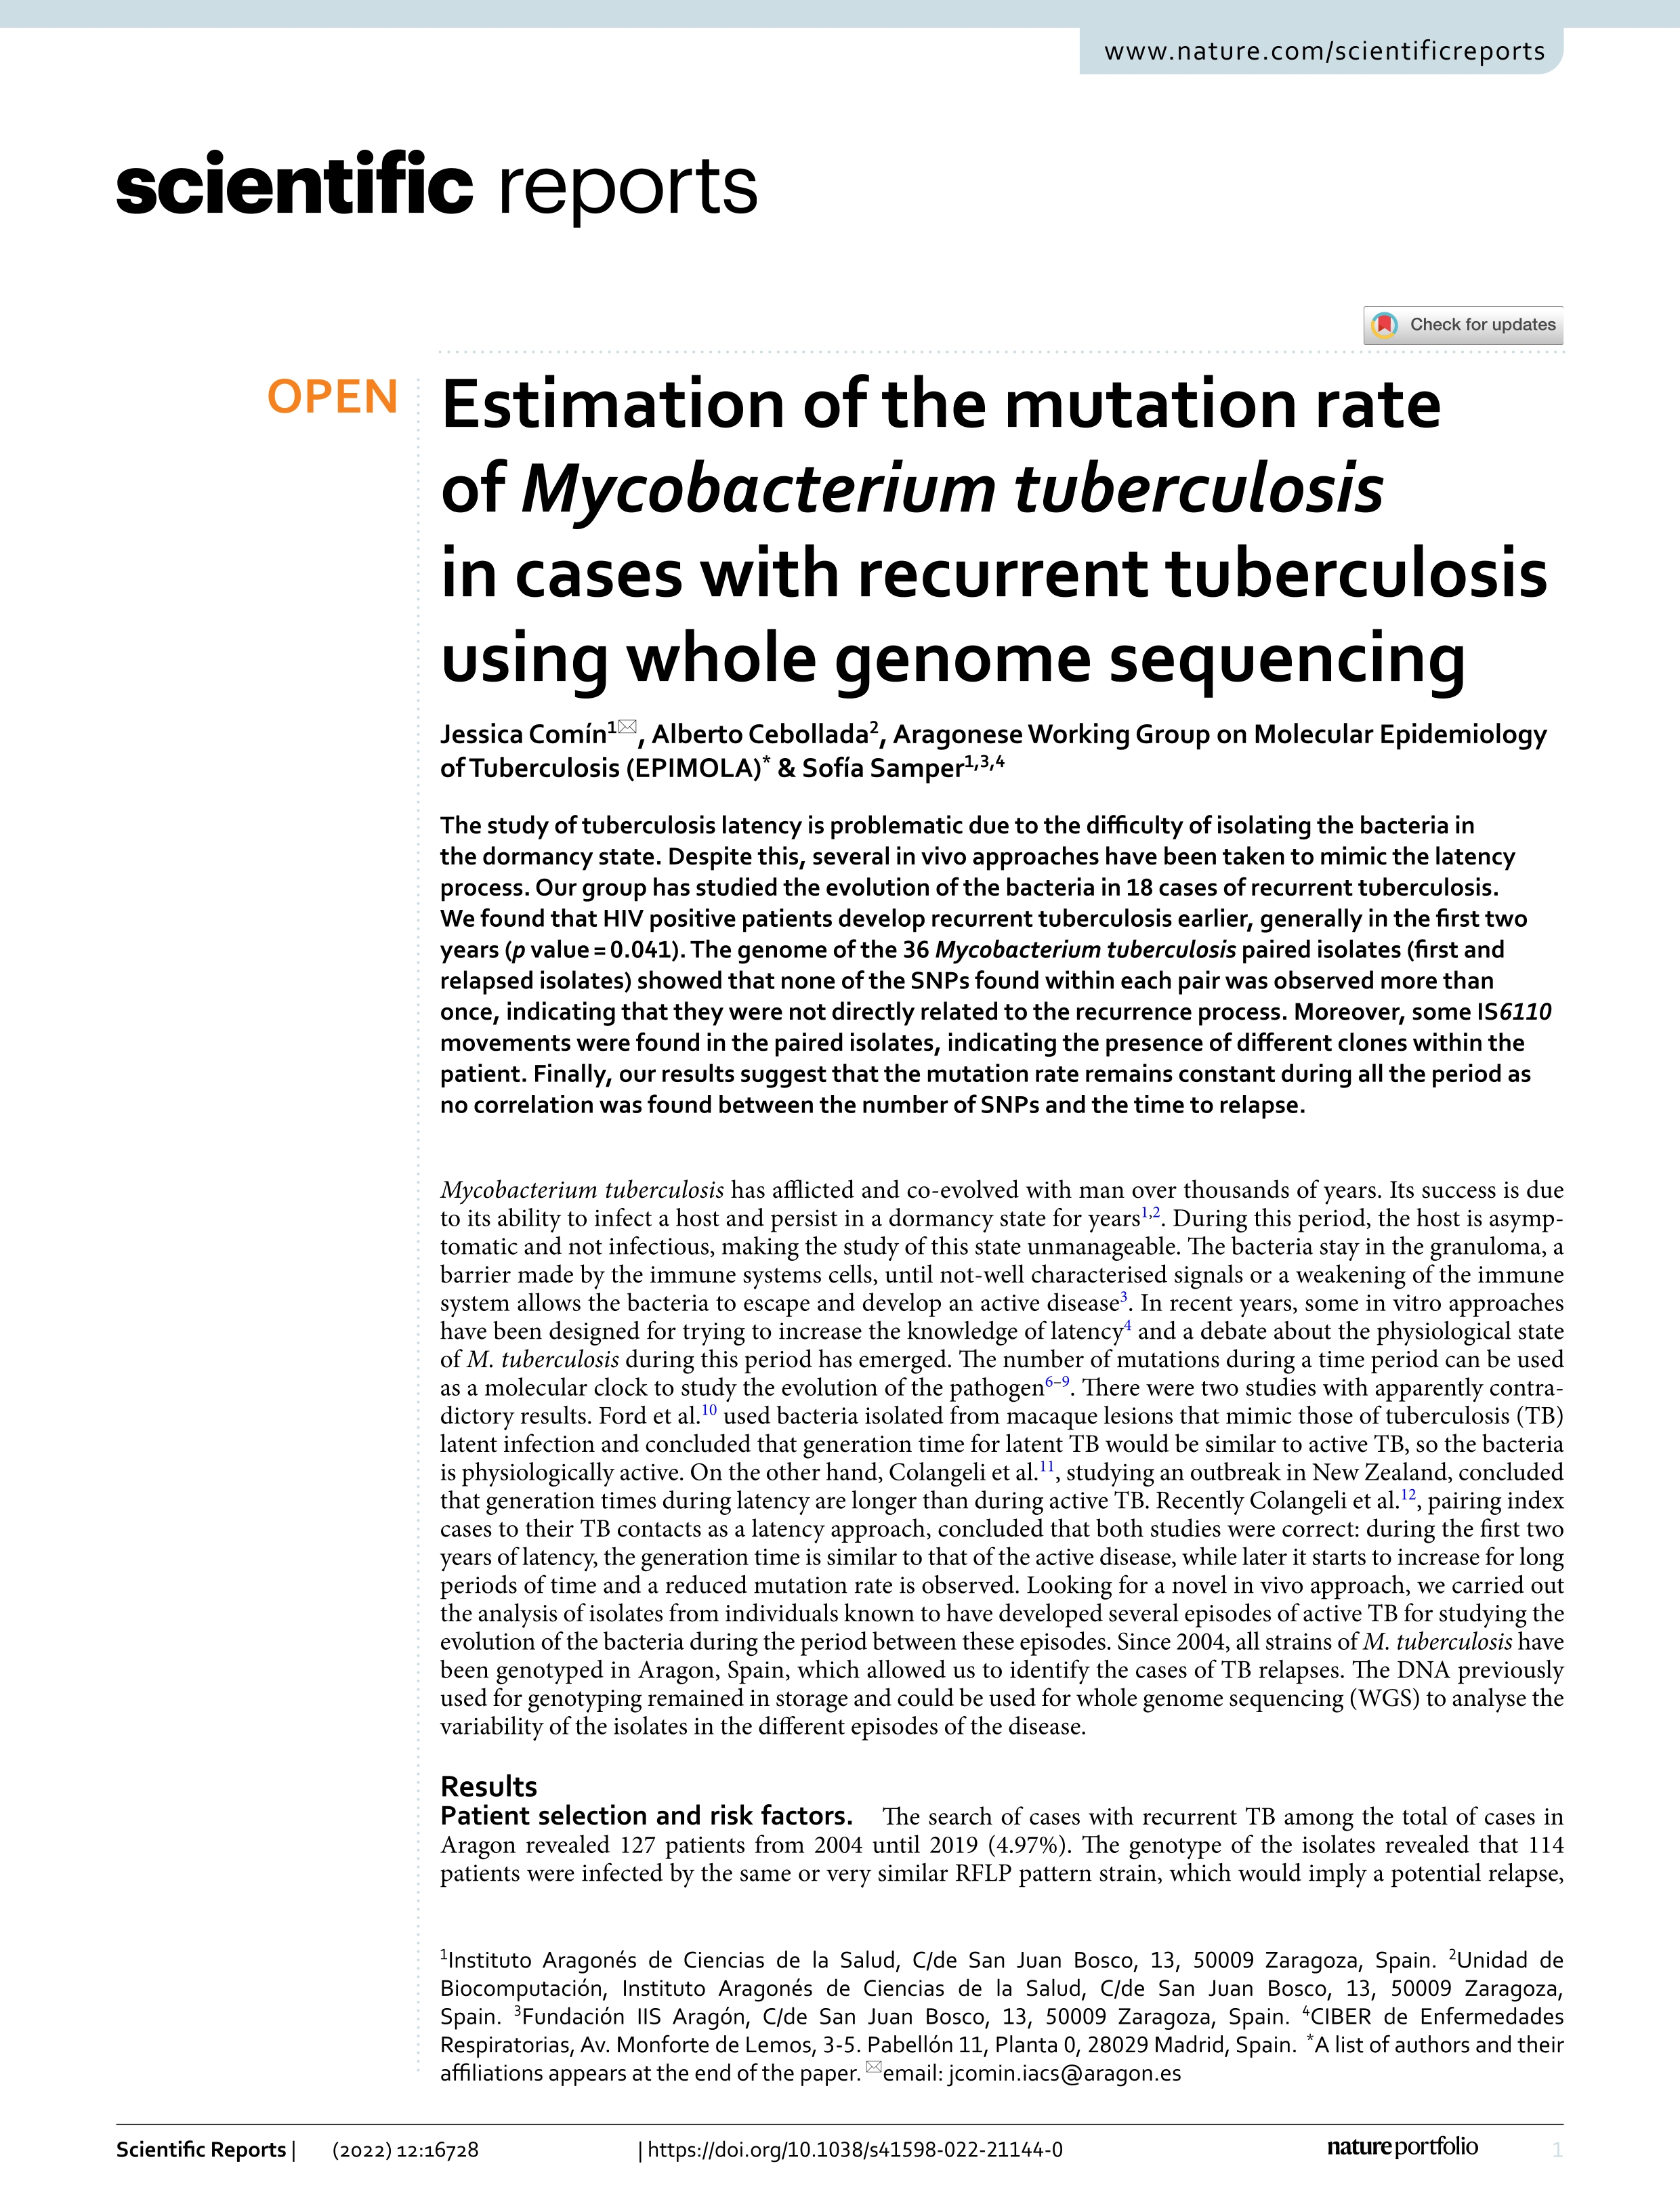 Estimation of the mutation rate of Mycobacterium tuberculosis in cases with recurrent tuberculosis using whole genome sequencing